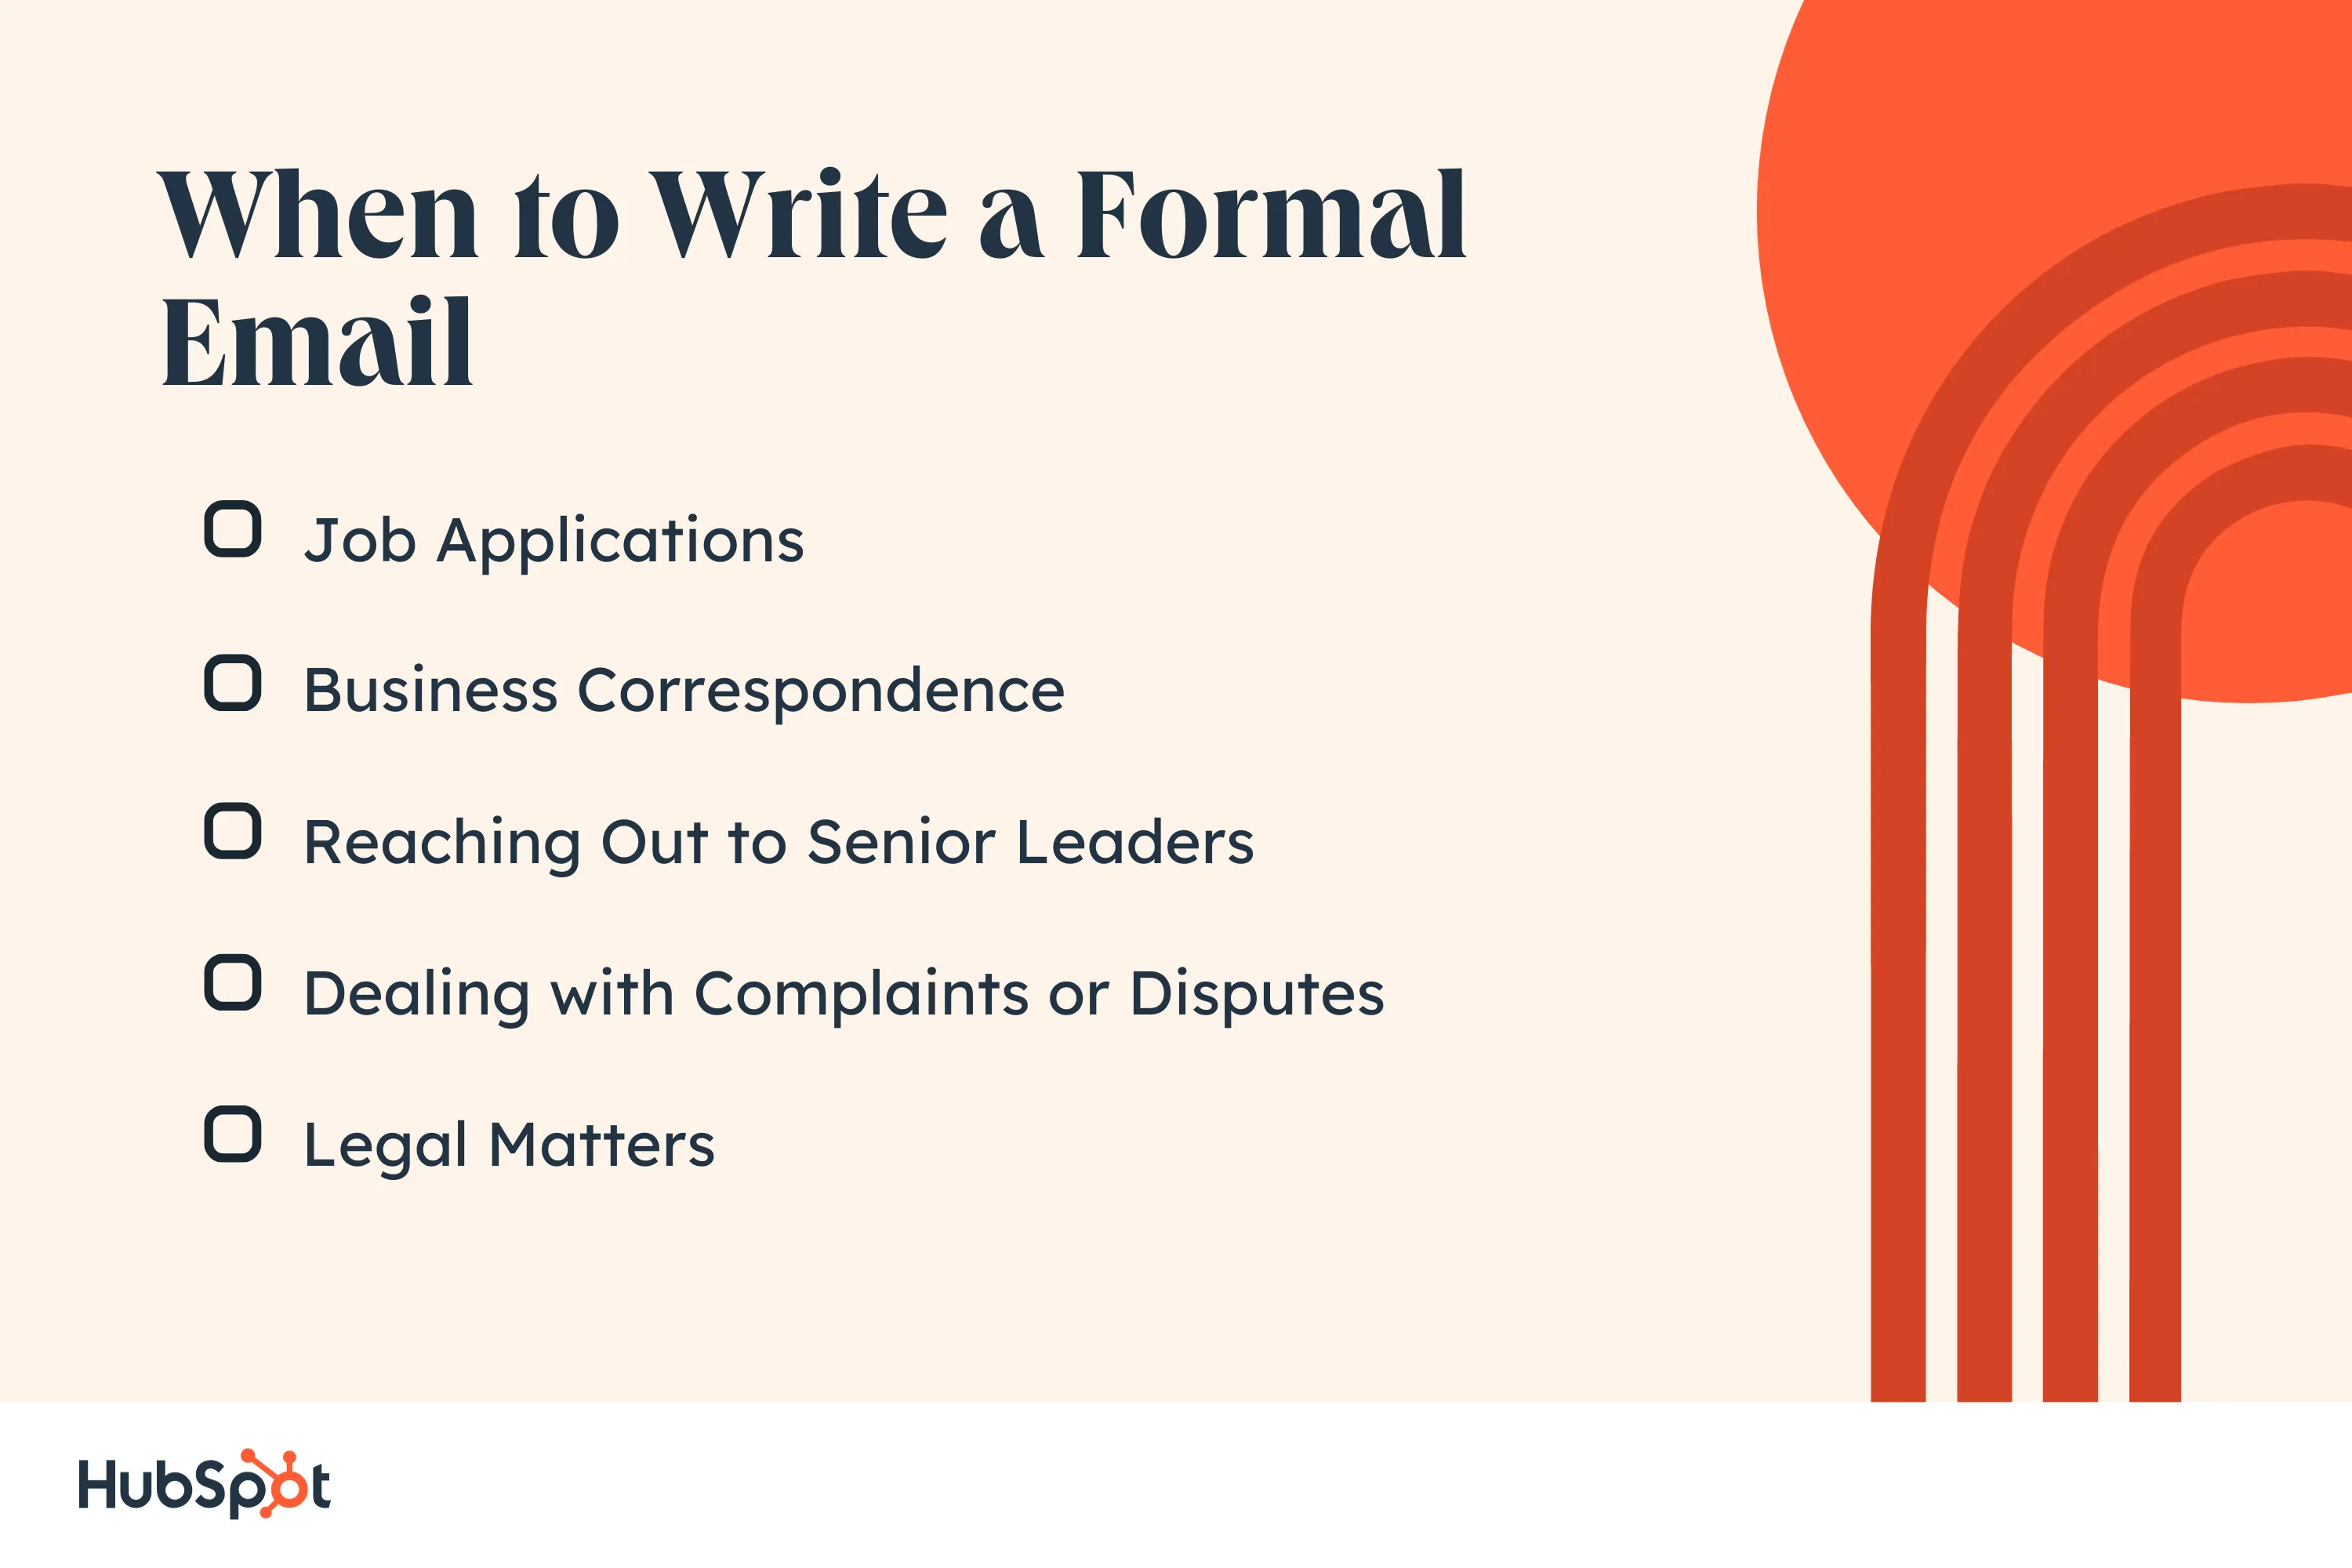 How to Start an Email: Formal and Informal Email Greetings